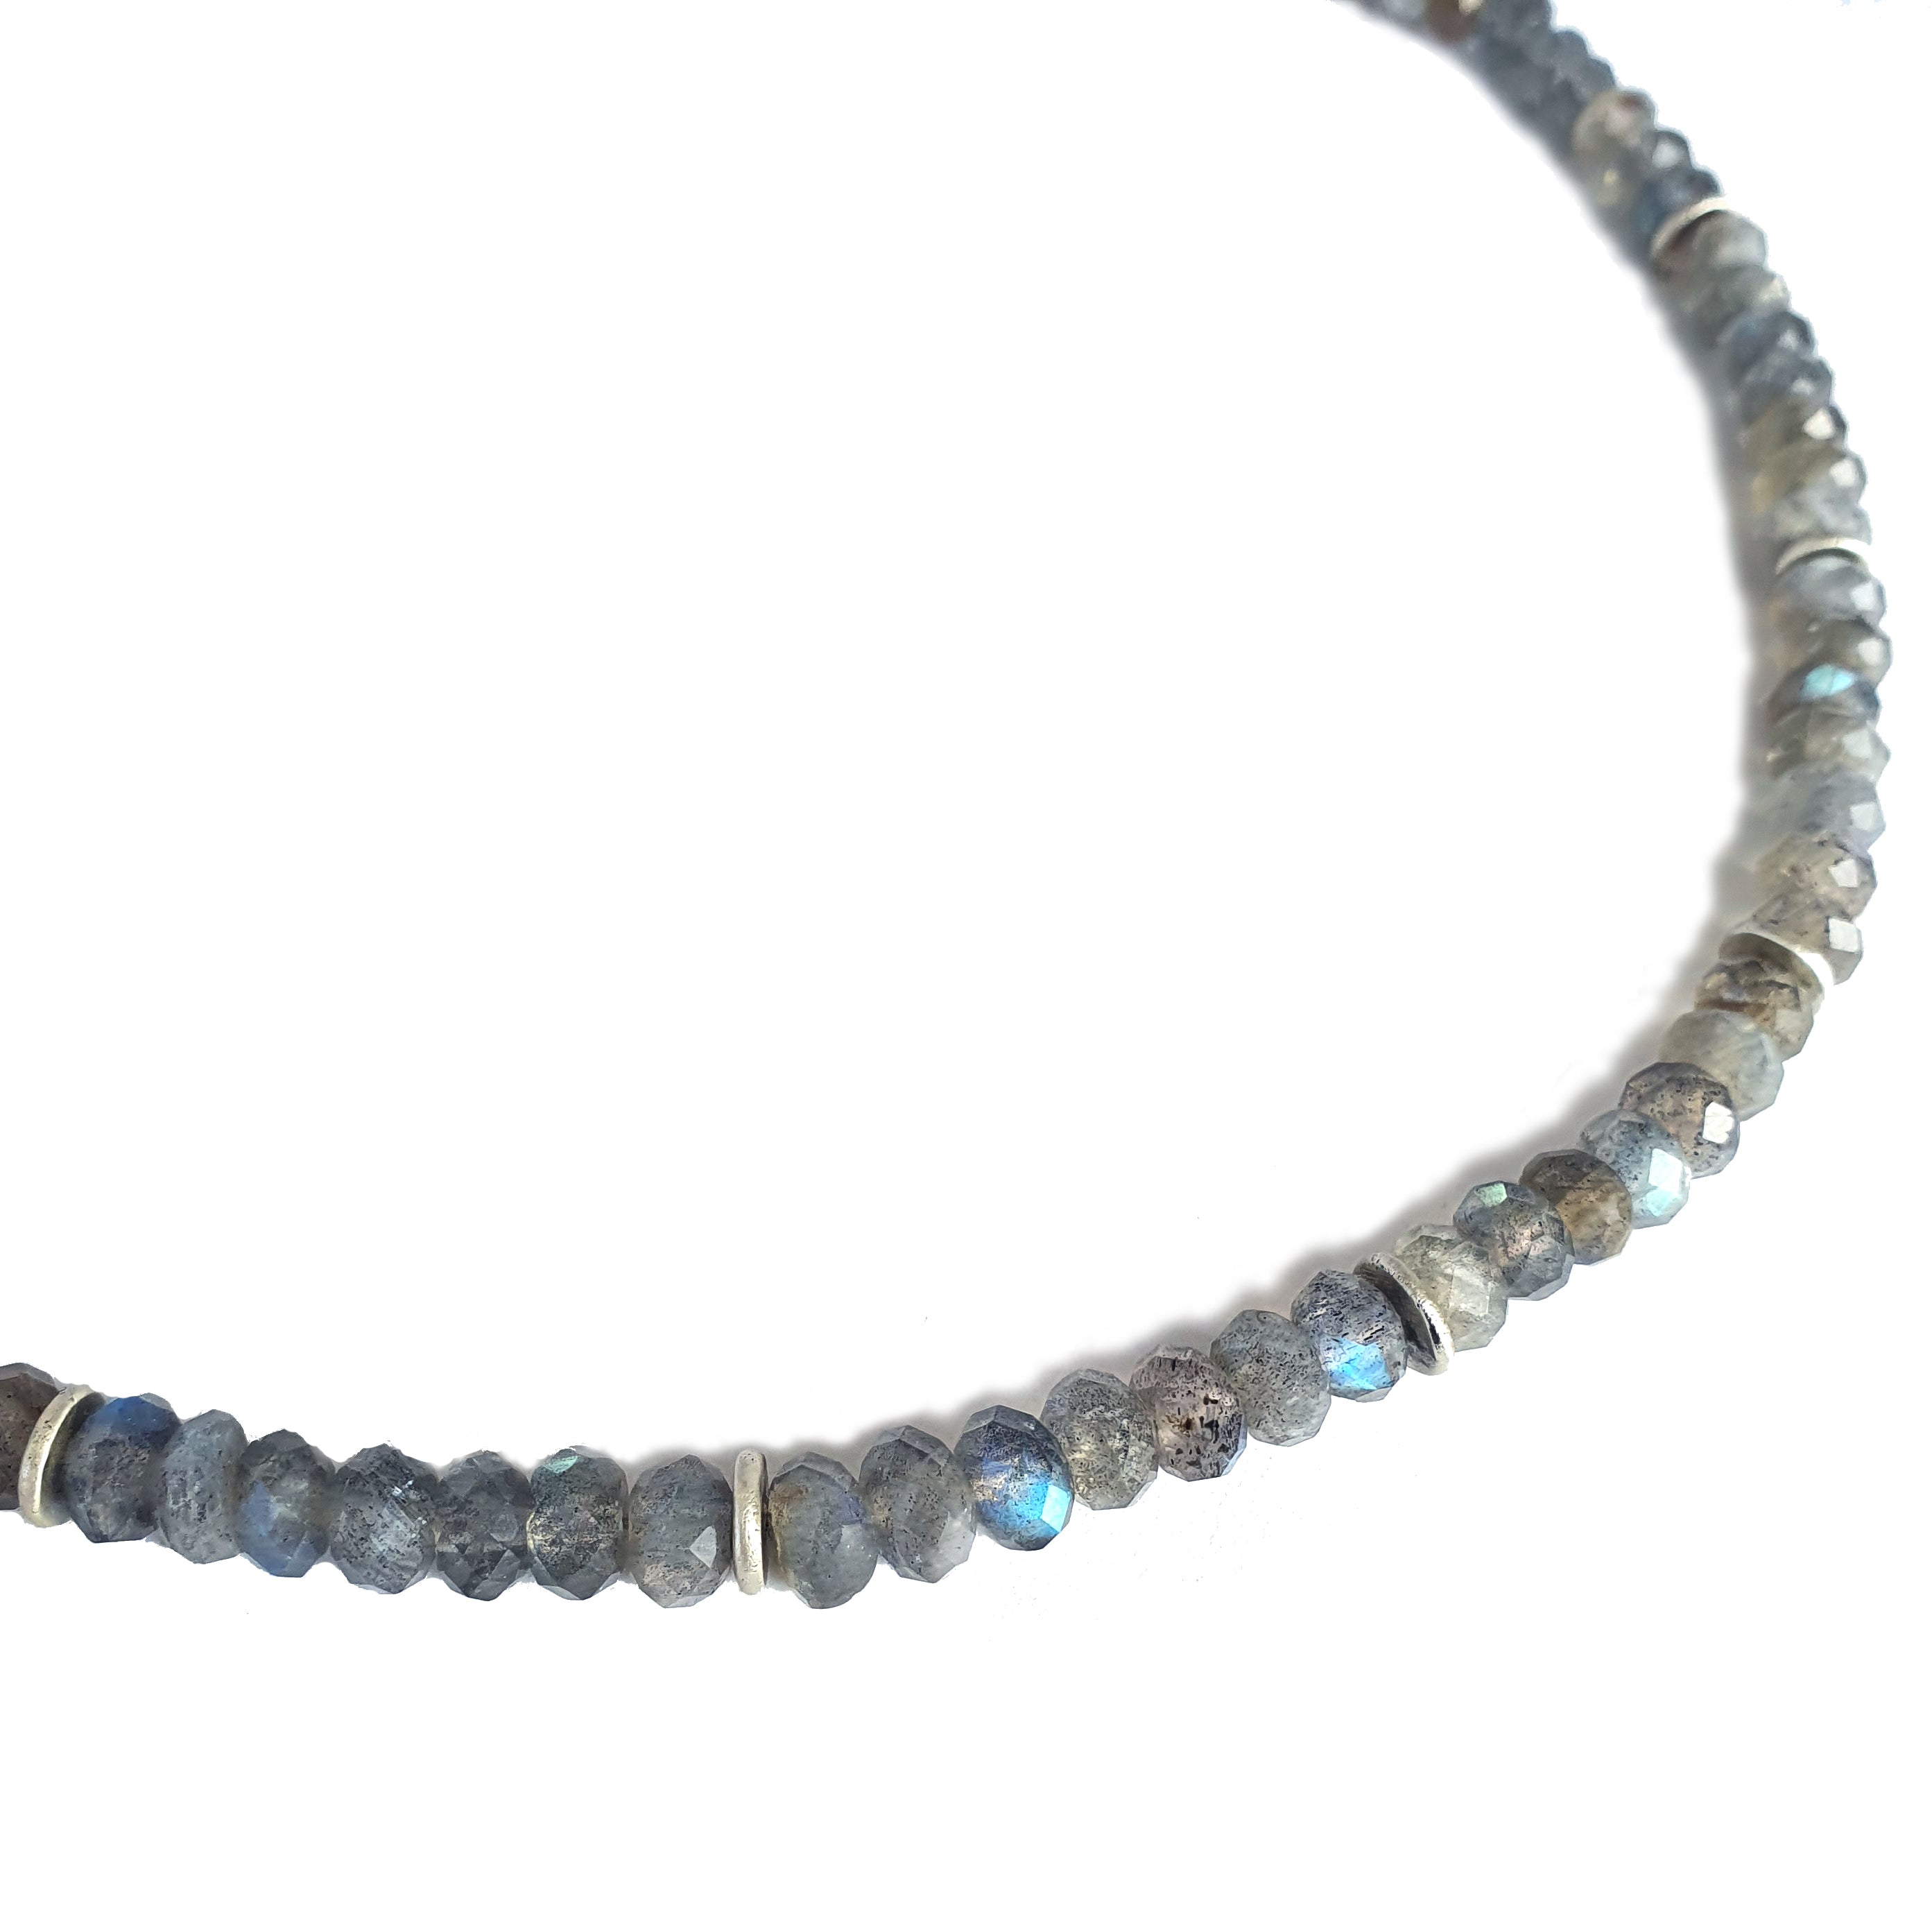 Emily Eliza Arlotte Handcrafted Fine Jewellery - Handmade Australian Tasmanian Jewelry Ethically Made Sustainable Recycled Sterling Silver Chain Labradorite Bead Beaded Choker Necklace Contemporary Dainty Statement Unique Trendy Modern Necklace Boho Bohemian Gypsy Witchy Alternative Style Festival Fashion